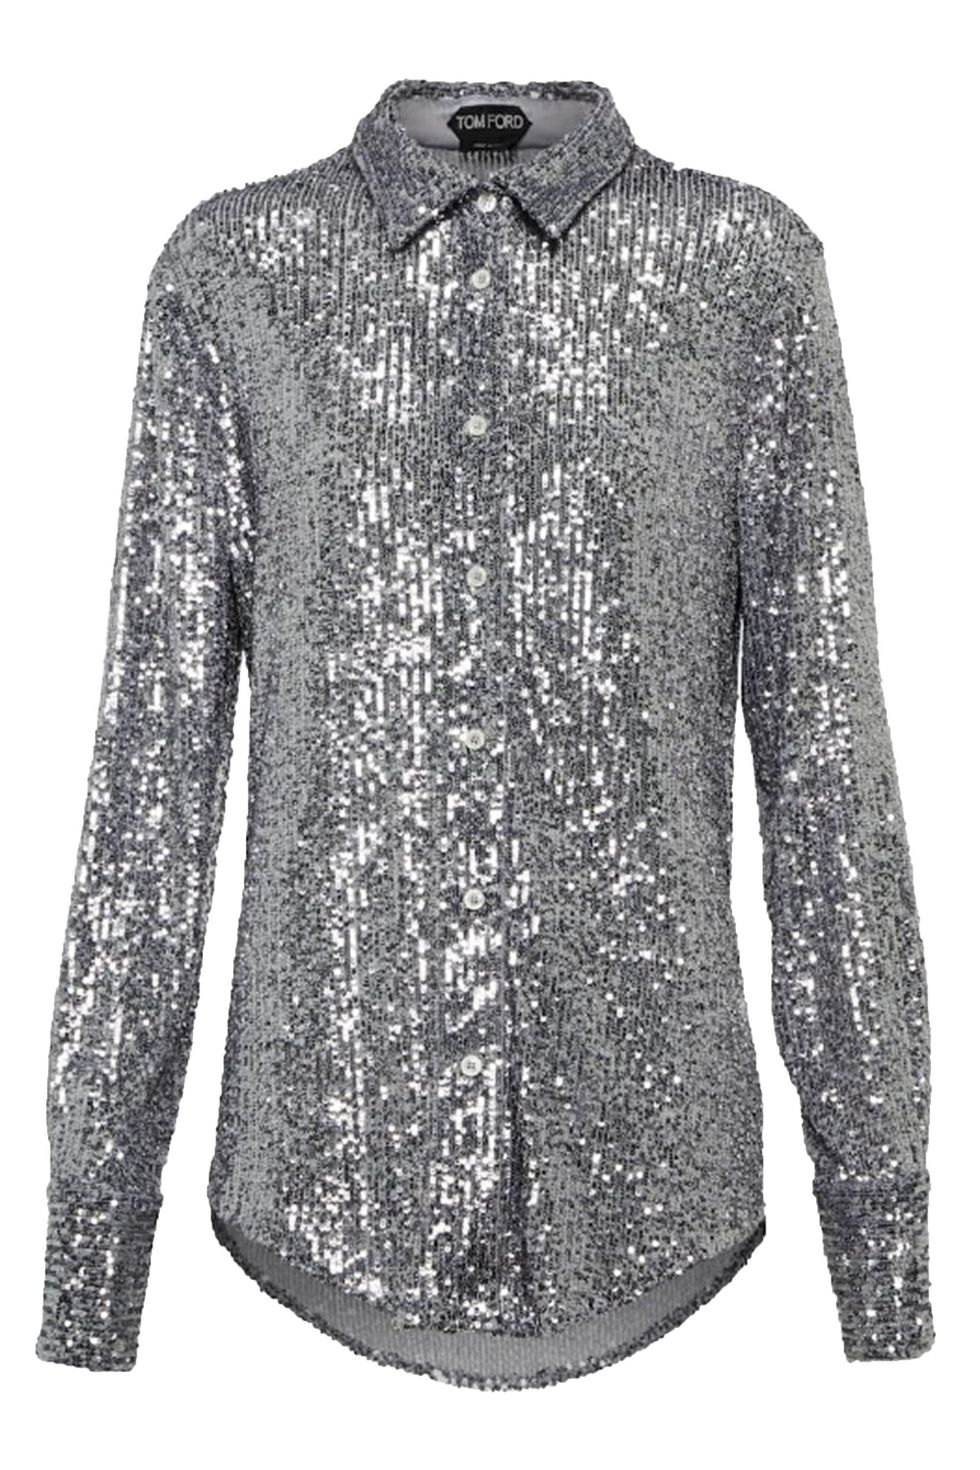 Tom Ford sequin shirt